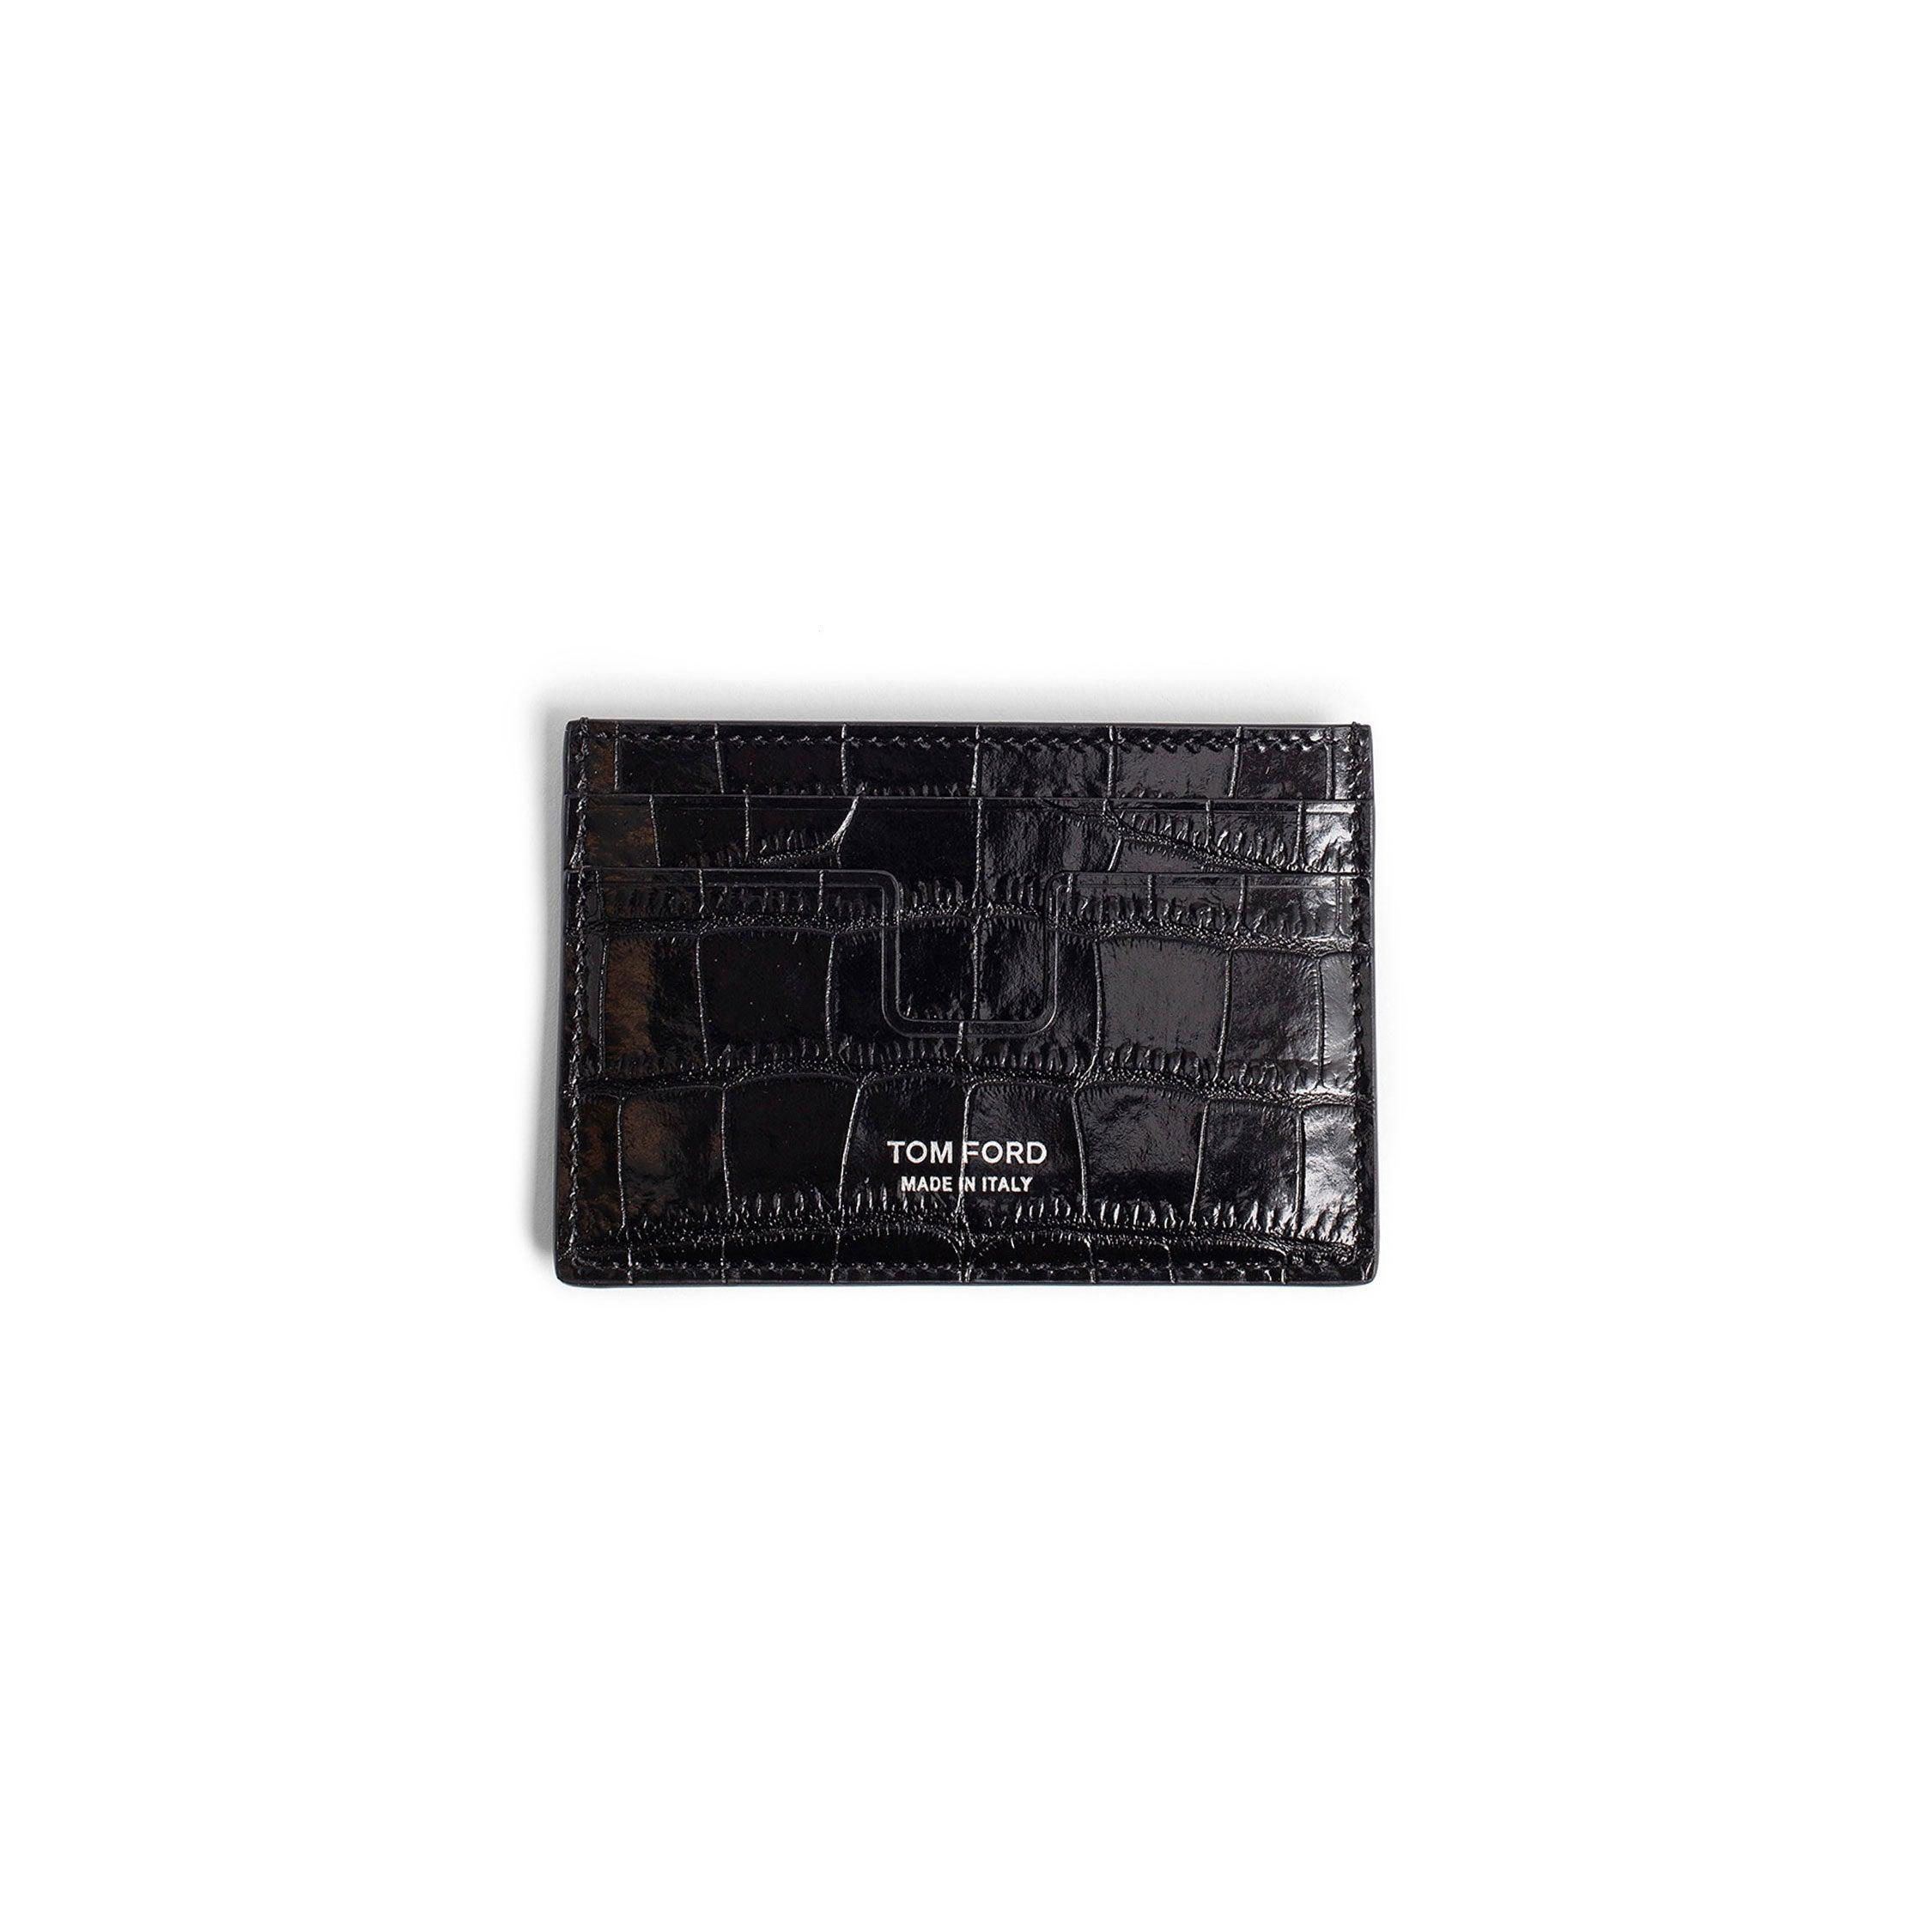 TOM FORD MAN BLACK WALLETS & CARDHOLDERS by TOM FORD